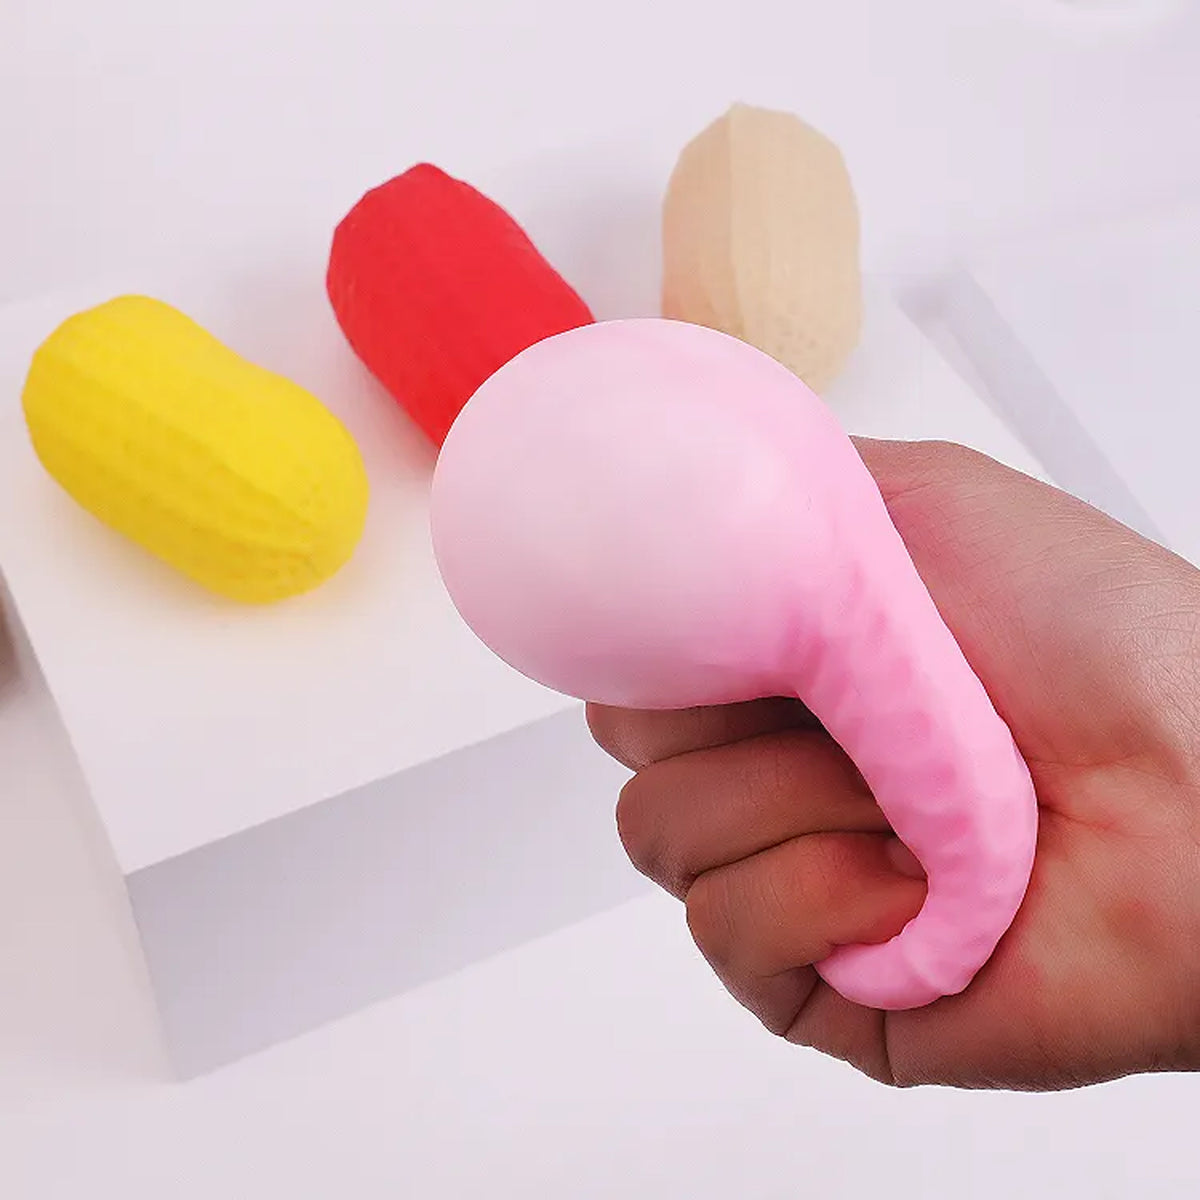 Relieve Stress with Creative Peanut Squeeze Ball Fidget Toys